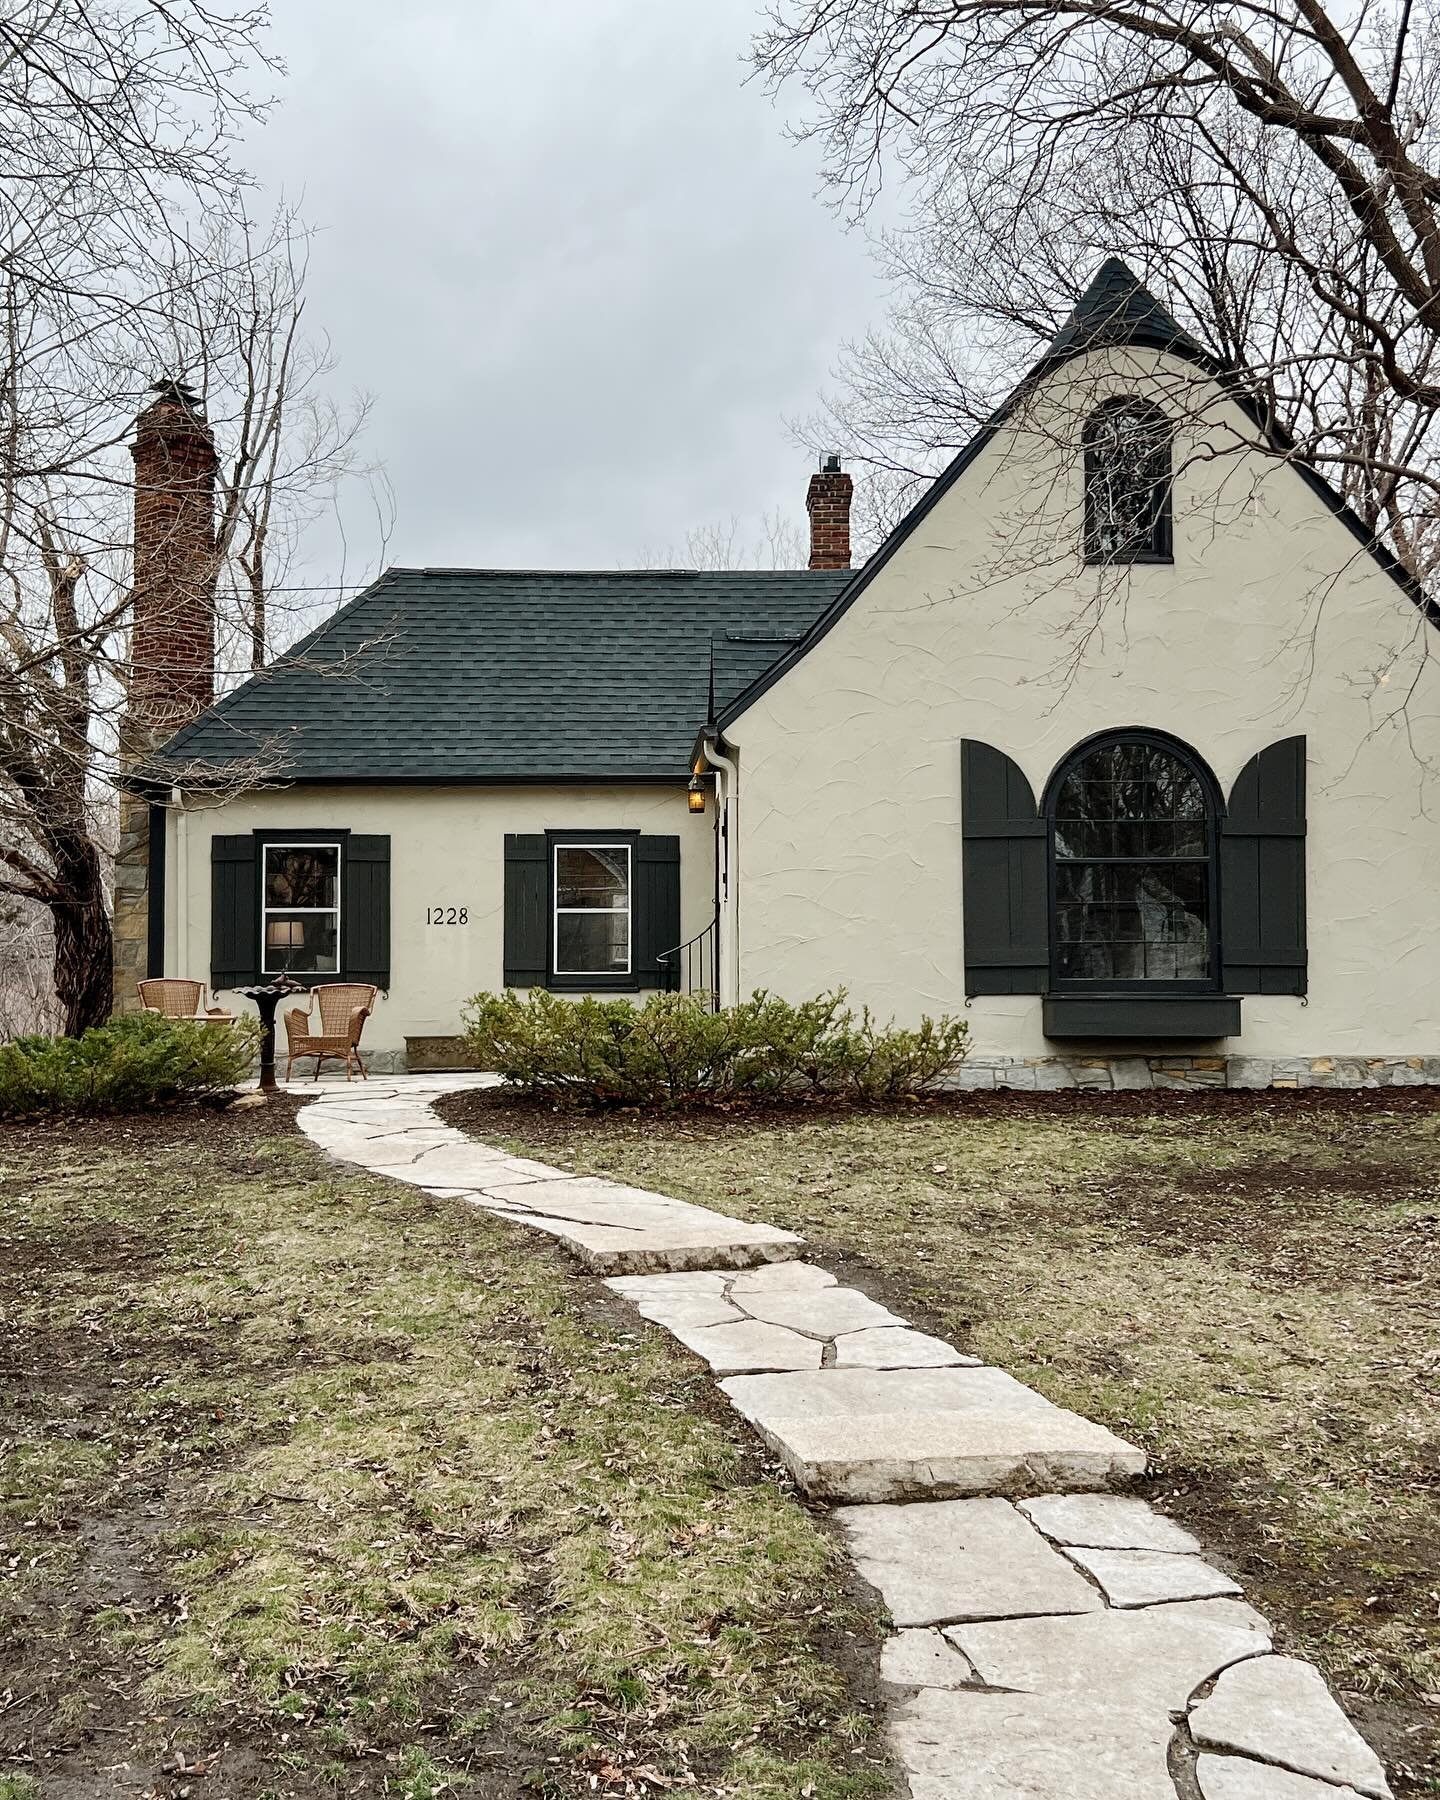 Lovely little Bryn-Mawr home with loads of character. Barrel and beamed ceiling, original hardwood floors and tile, Big windows, plastered walls. Close to Brownie and Cedar lake!

Interested in finding your own home to love? Fill out my &lsquo;buy wi